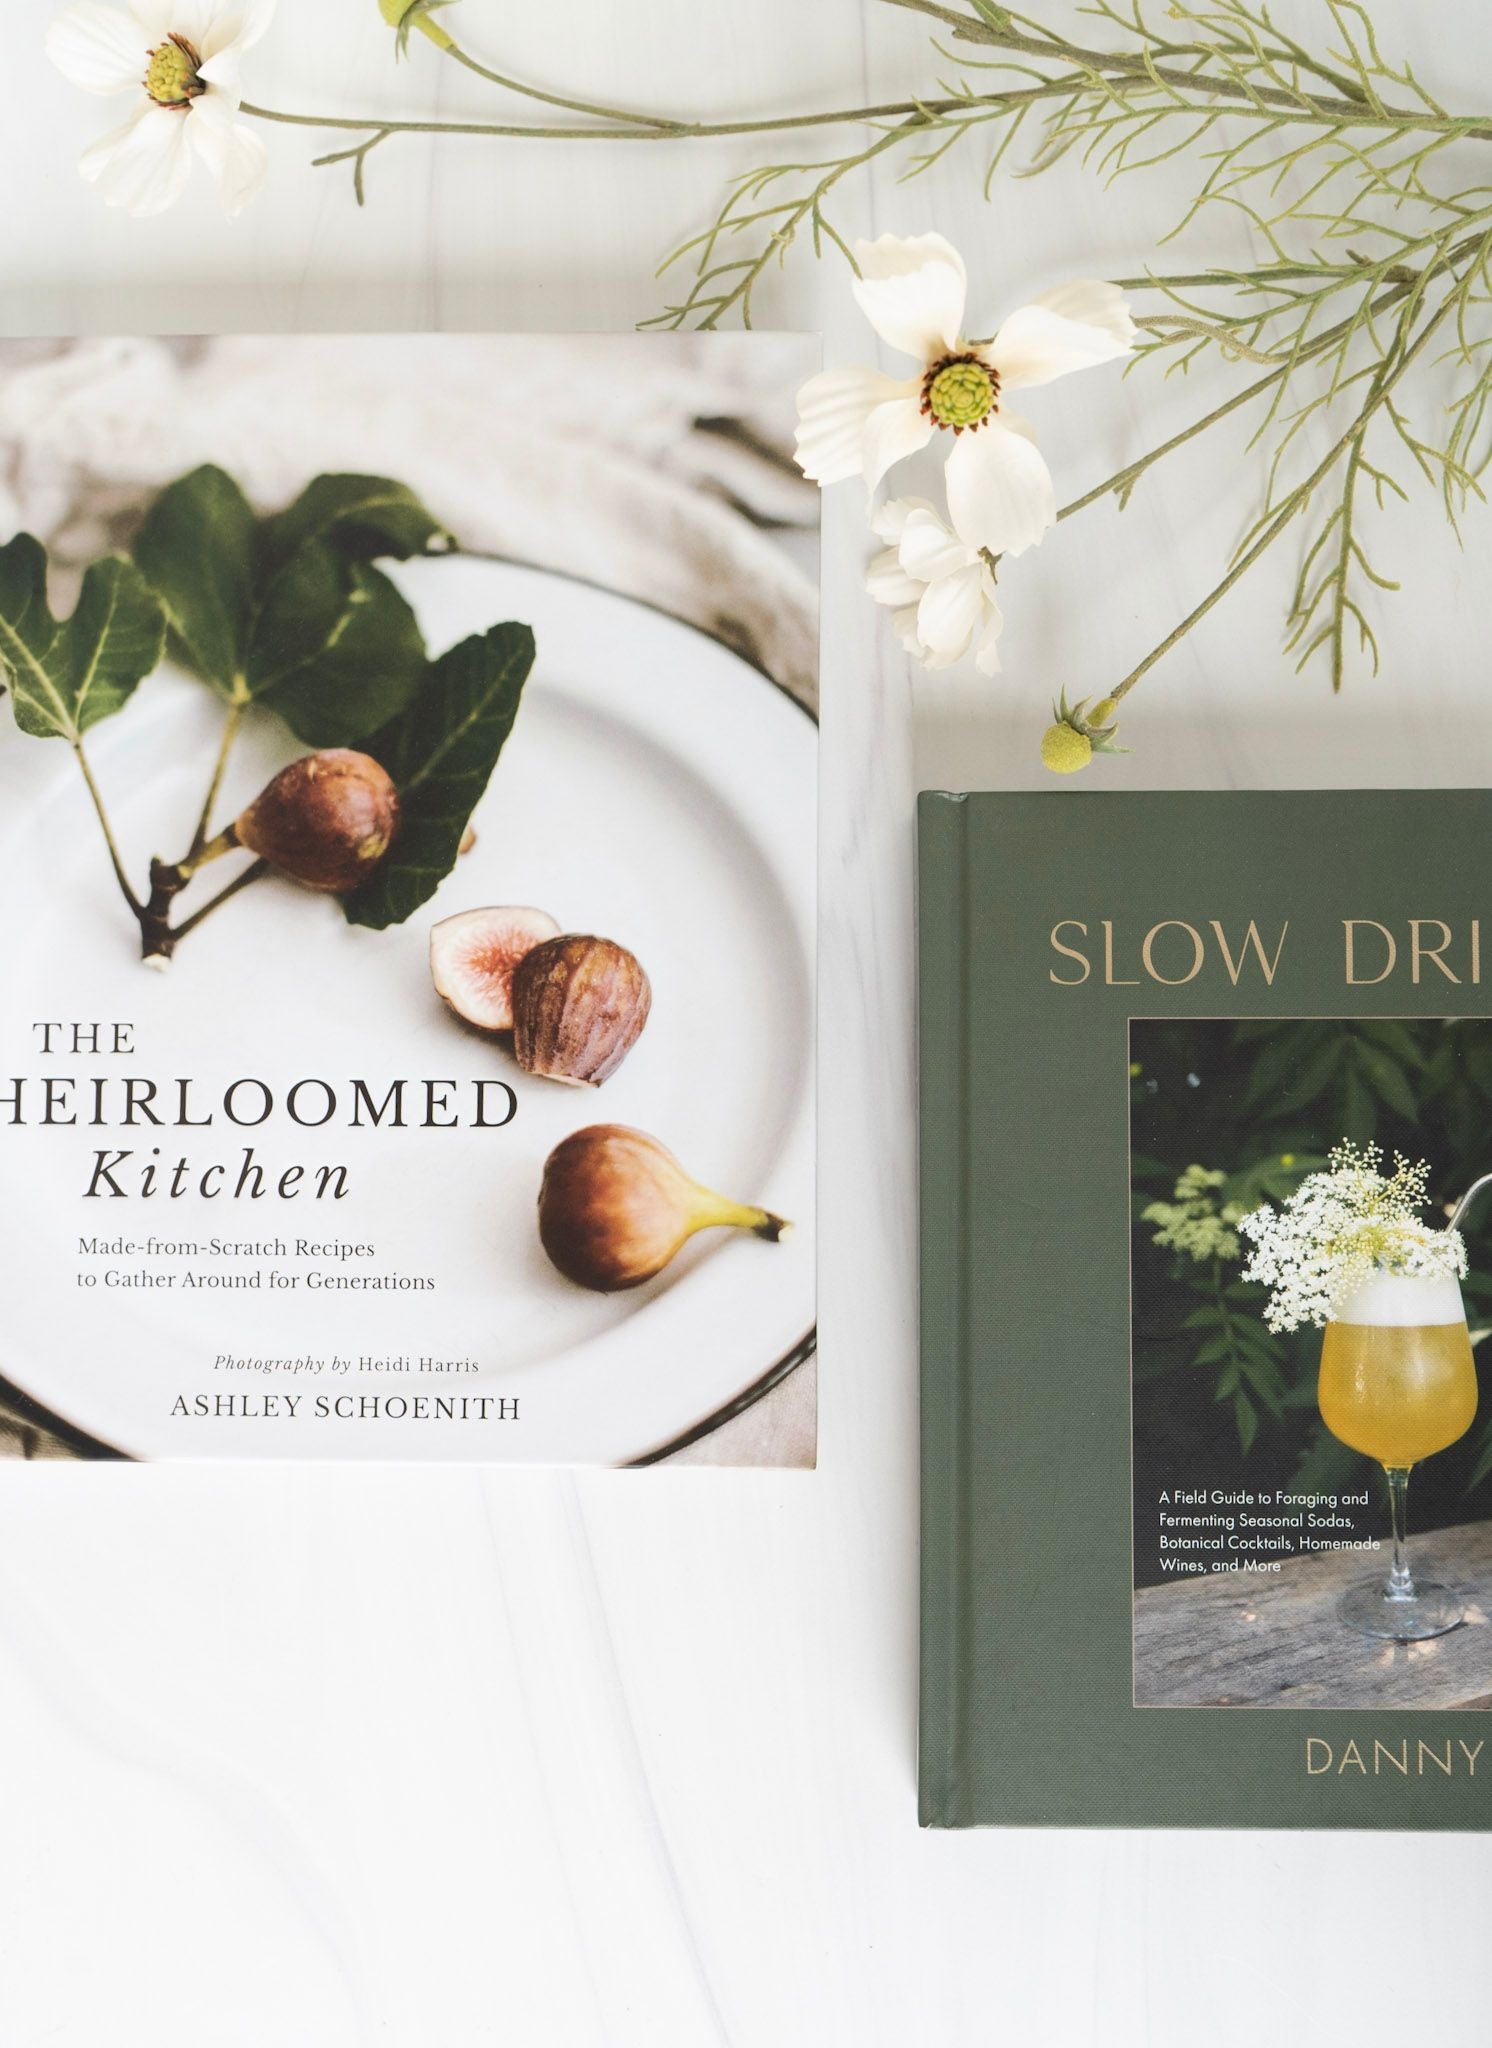 The Heirloomed Kitchen Cookbook by Ashley Schoenith